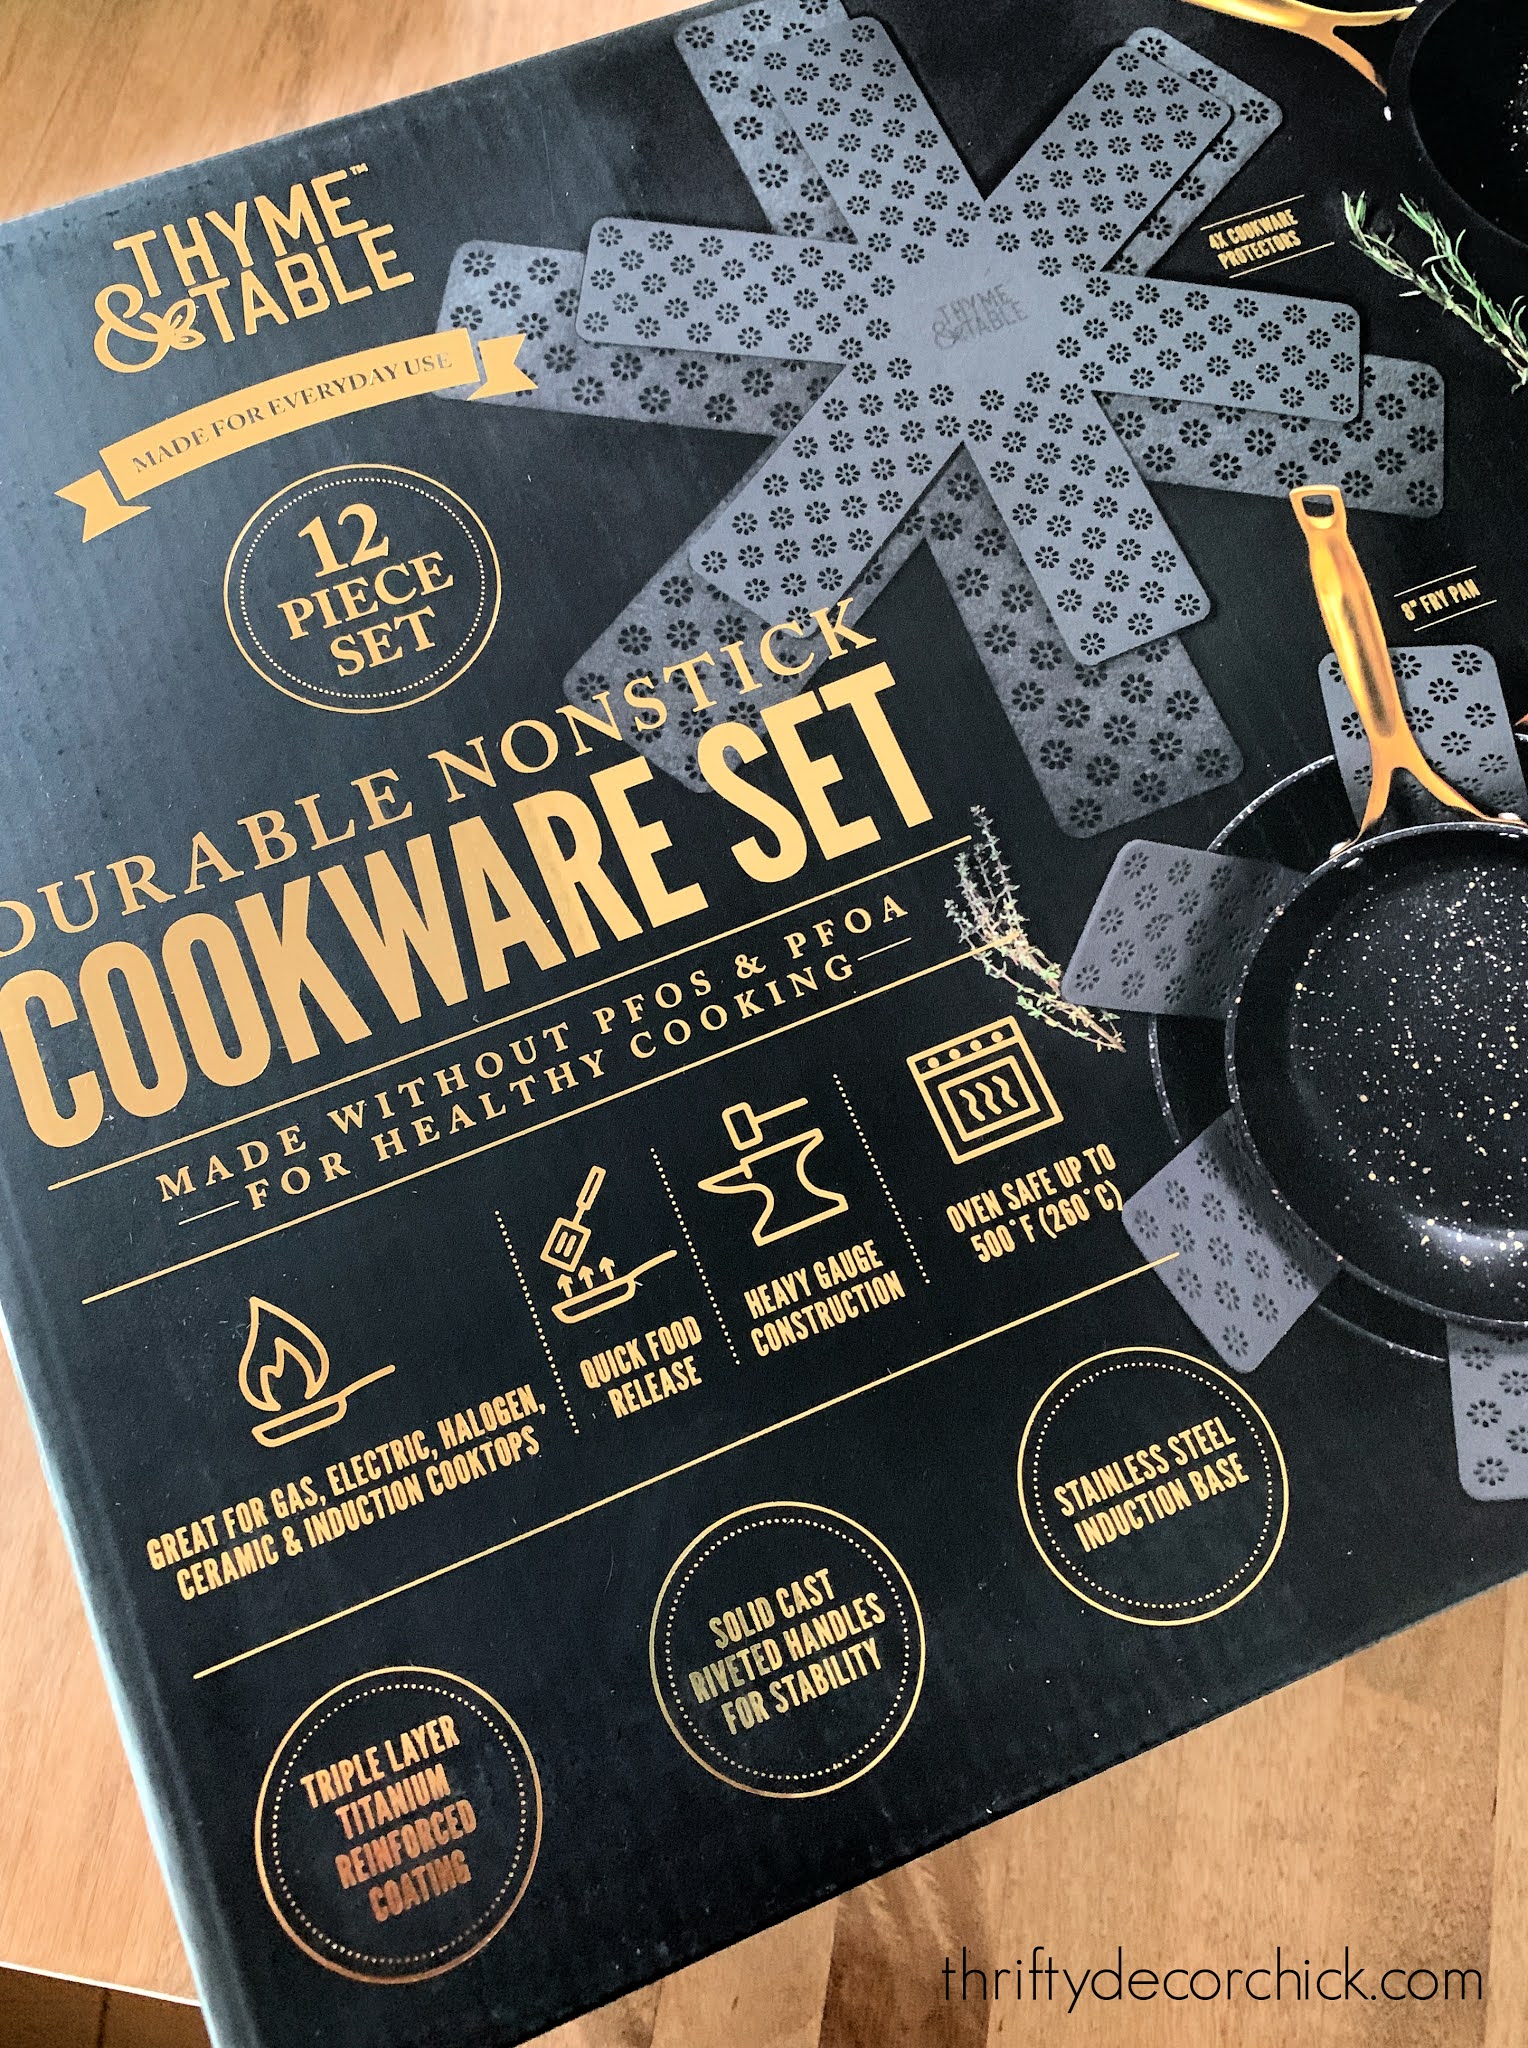 The most beautifulcookware? Yes!